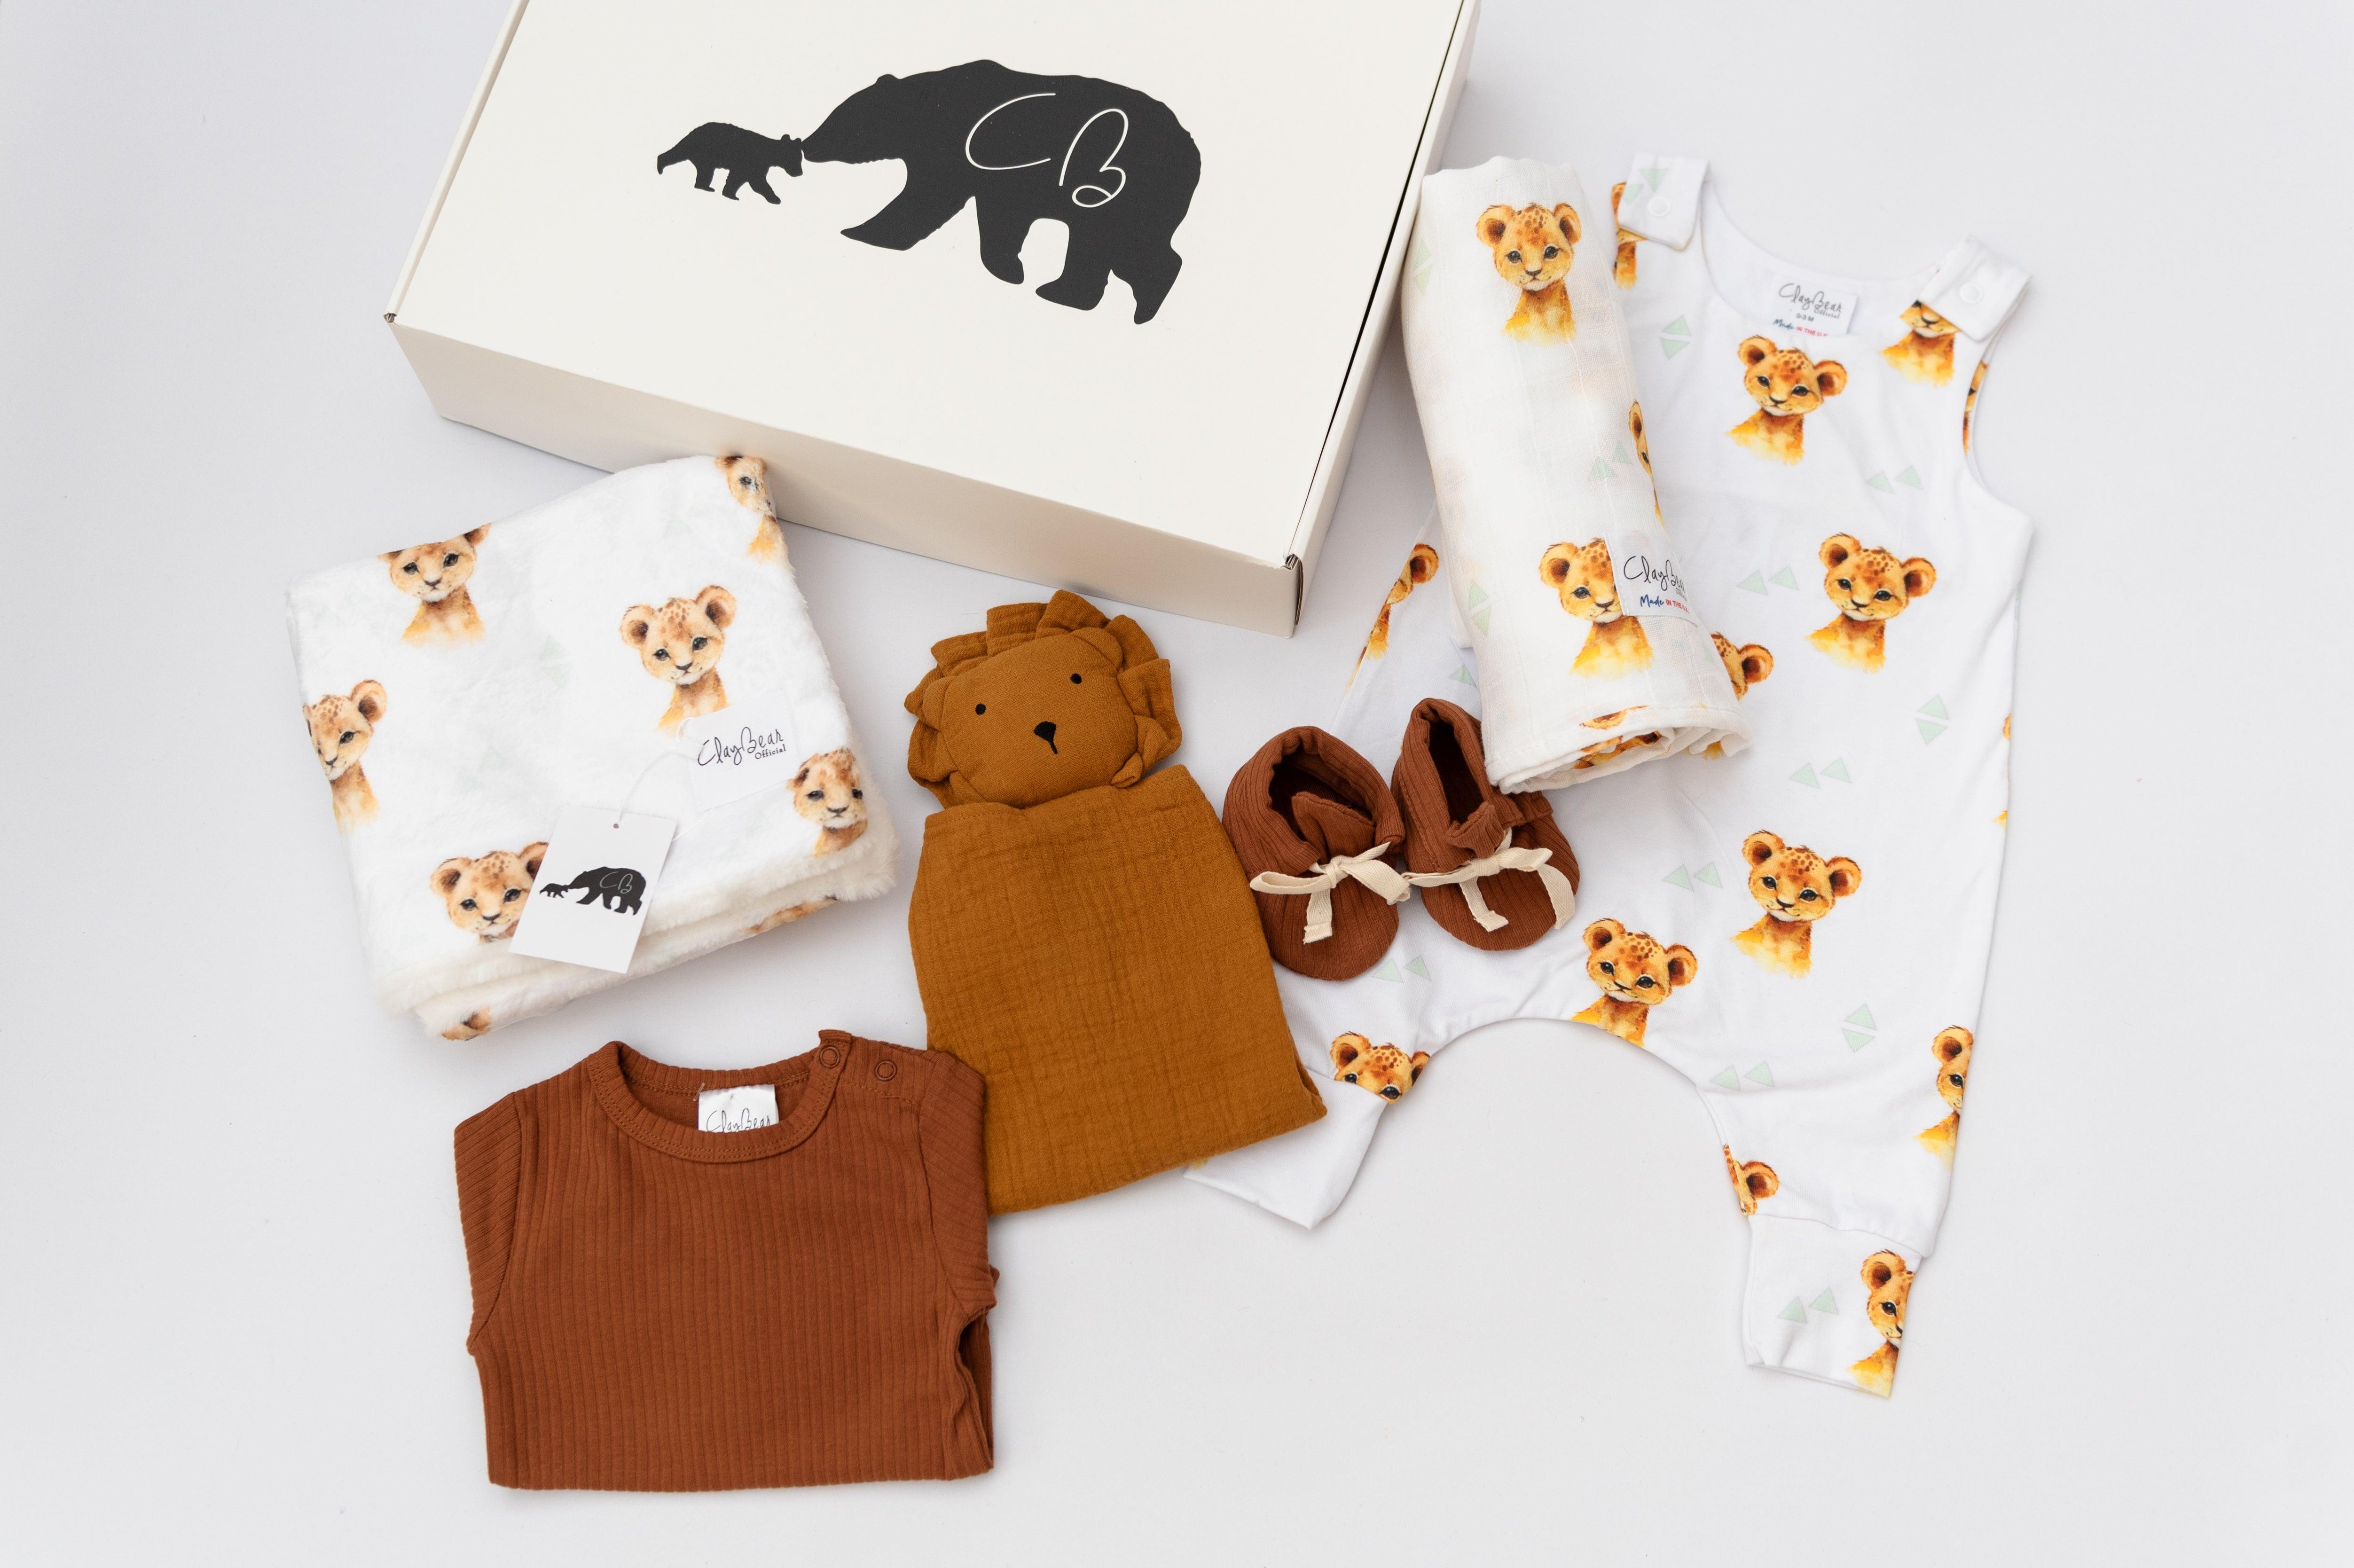 files/new-baby-gift-box-lion-cub-claybearofficial-11.jpg